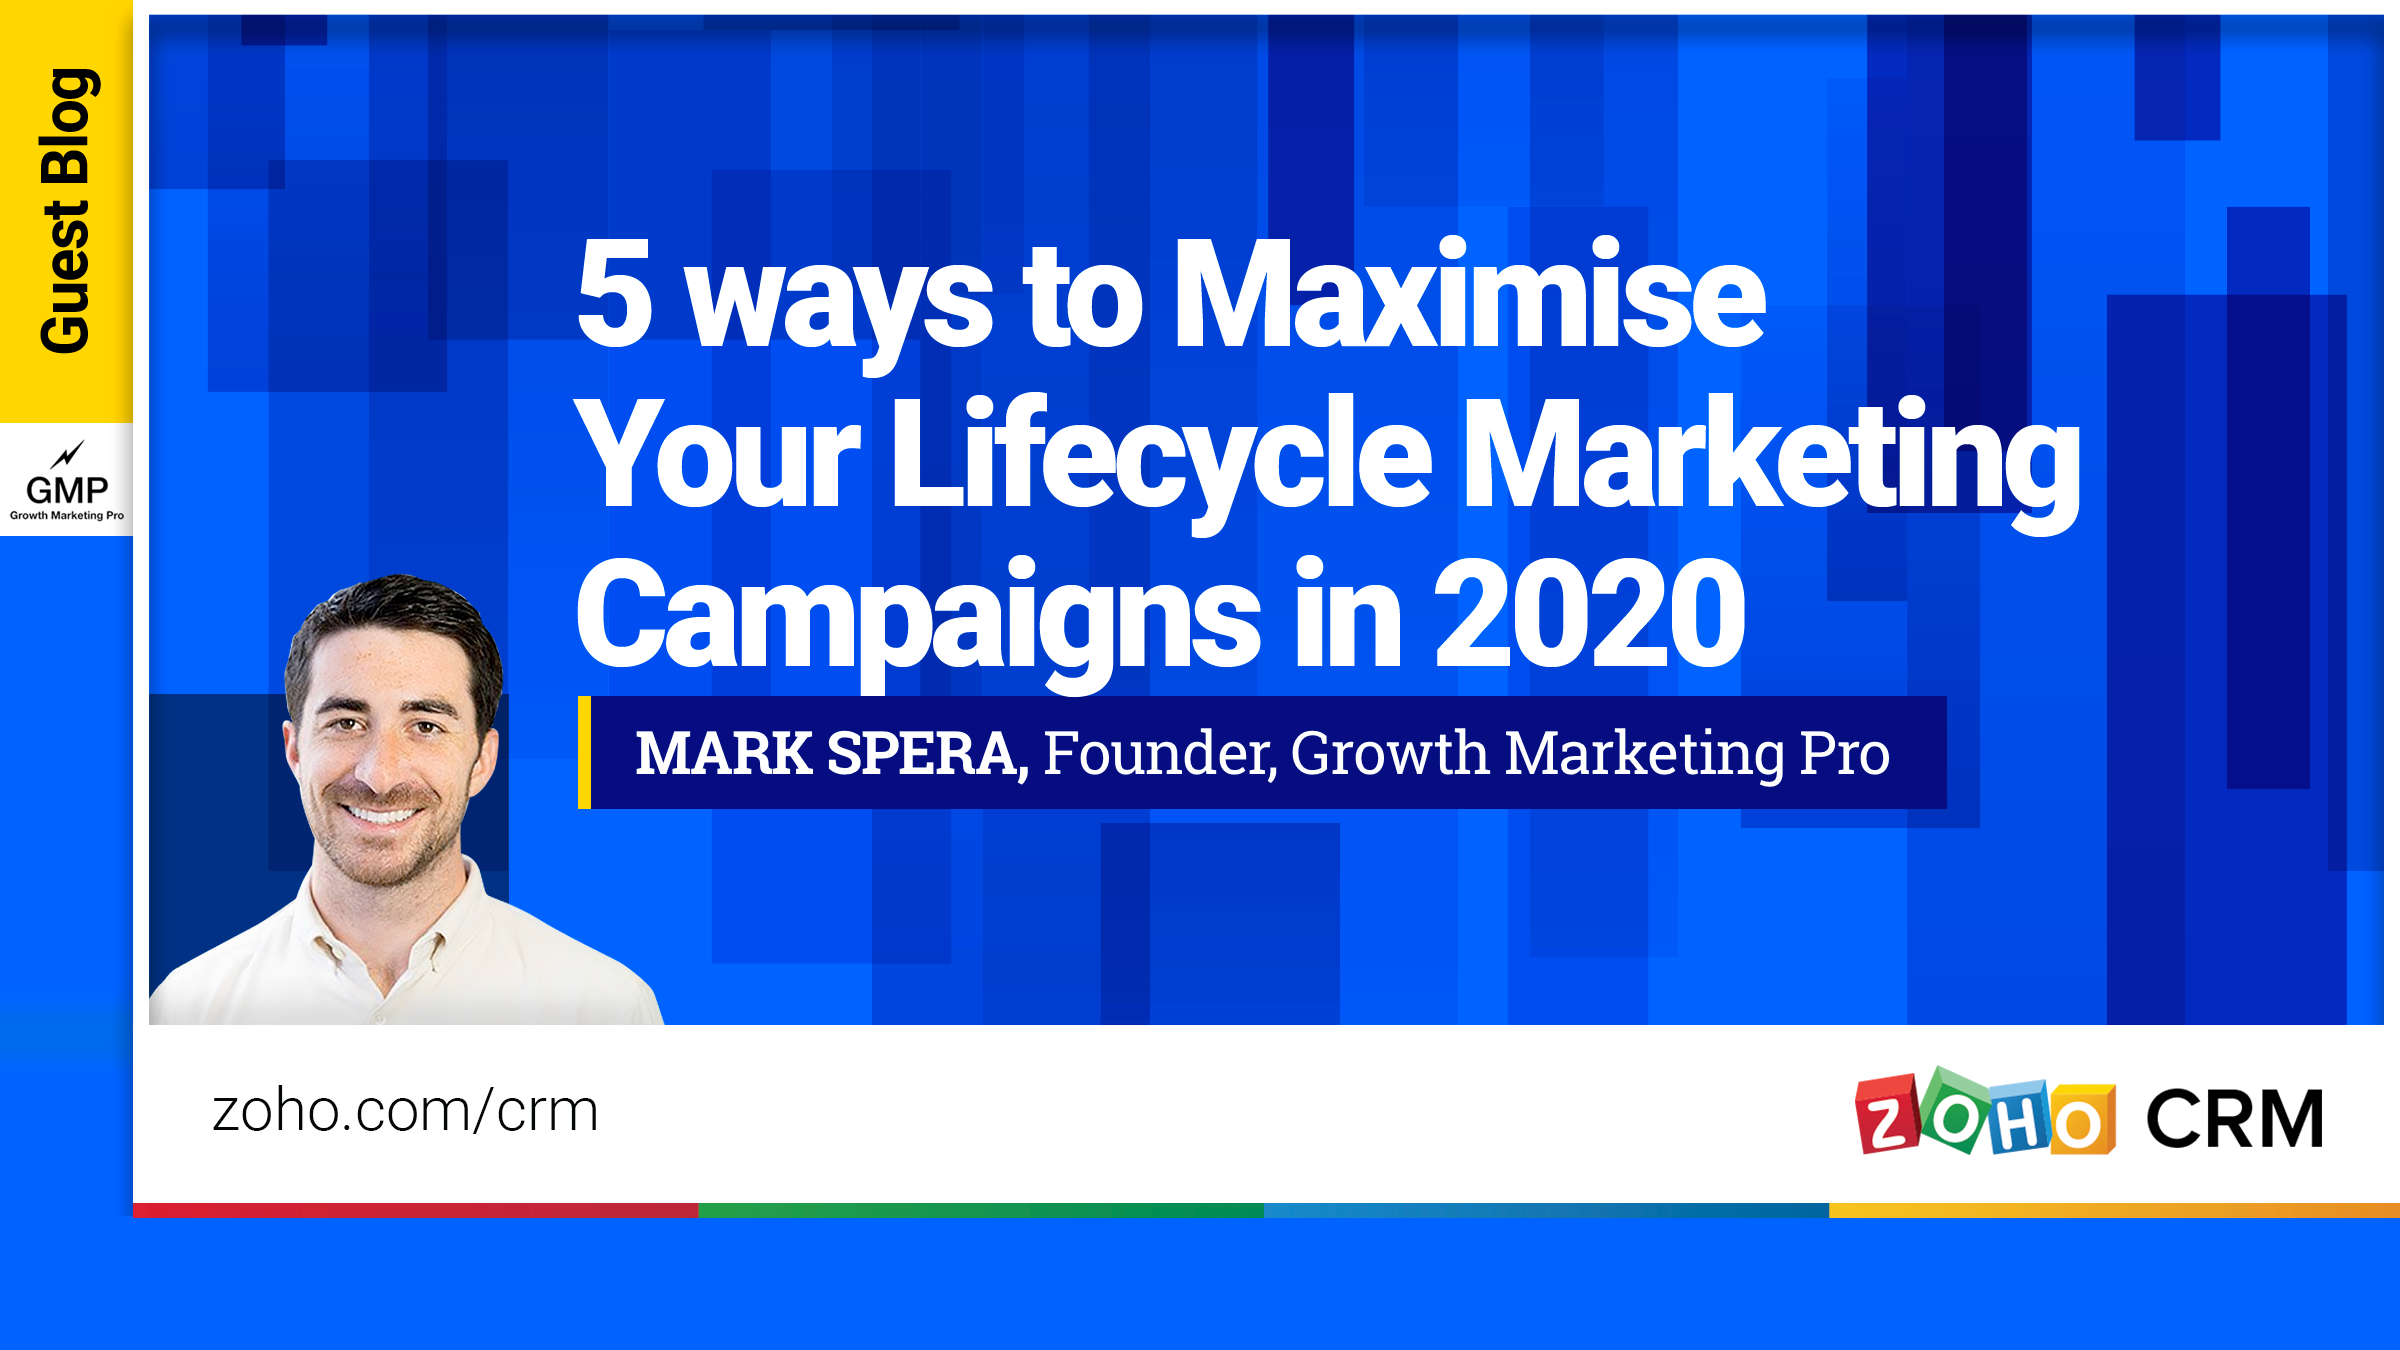 5 Ways to Maximize Your Lifecycle Marketing Campaigns in 2020